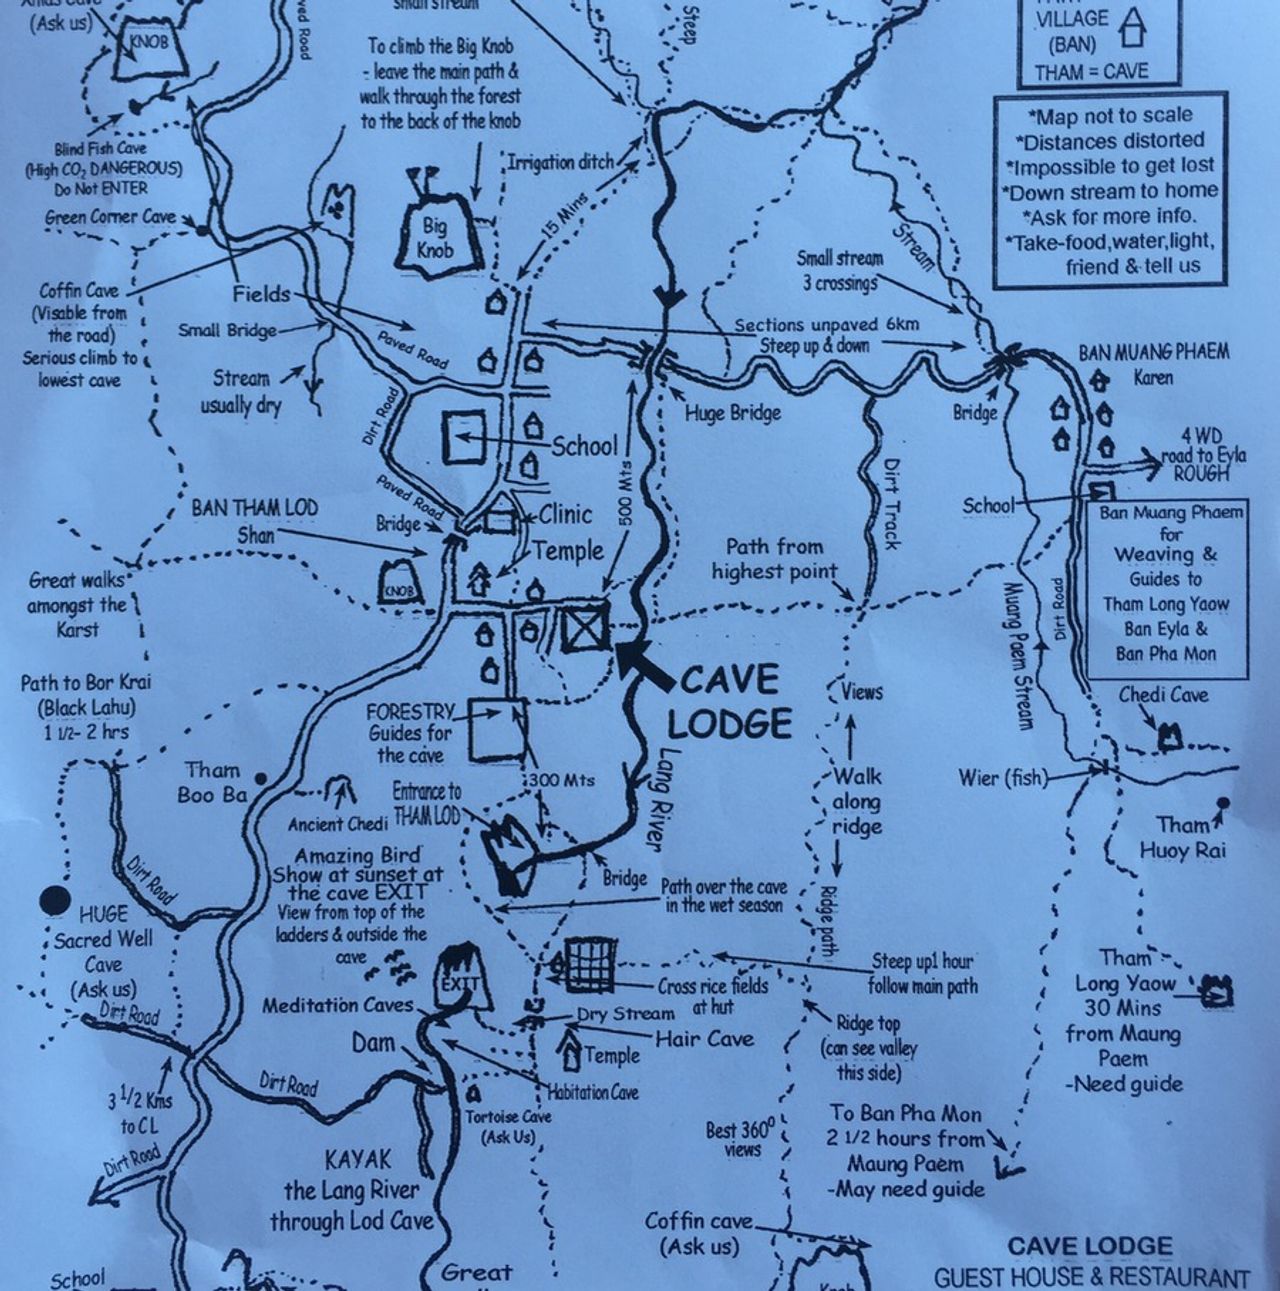 Hand-drawn map of Cave Lodge area.